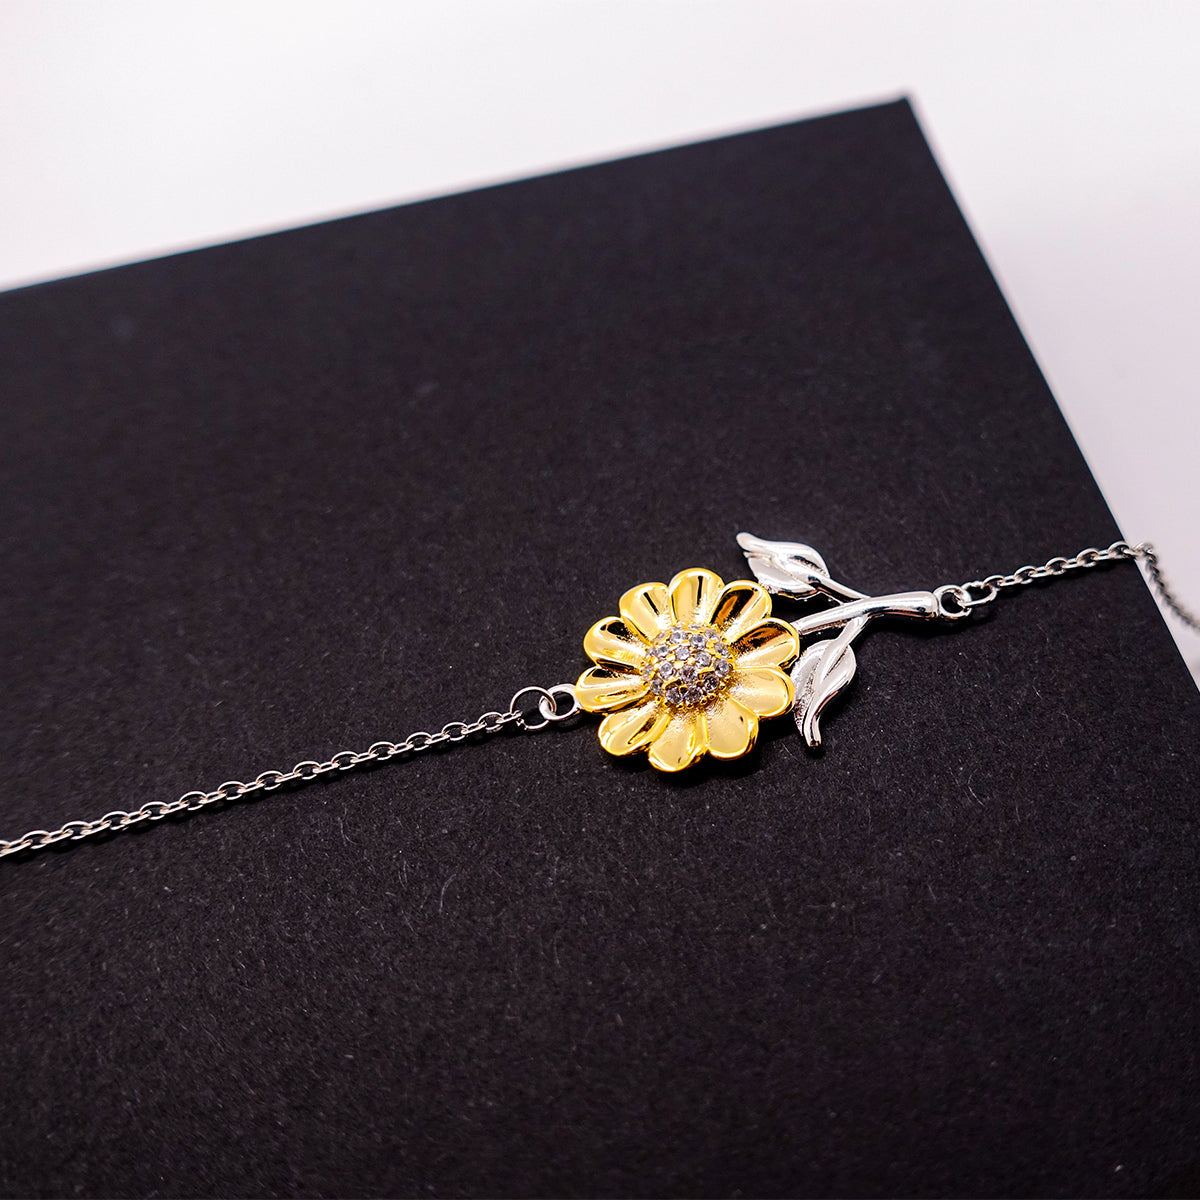 Niece Motivational Gifts from Auntie, Remember to never give up no matter what, Inspirational Birthday Sunflower Bracelet for Niece